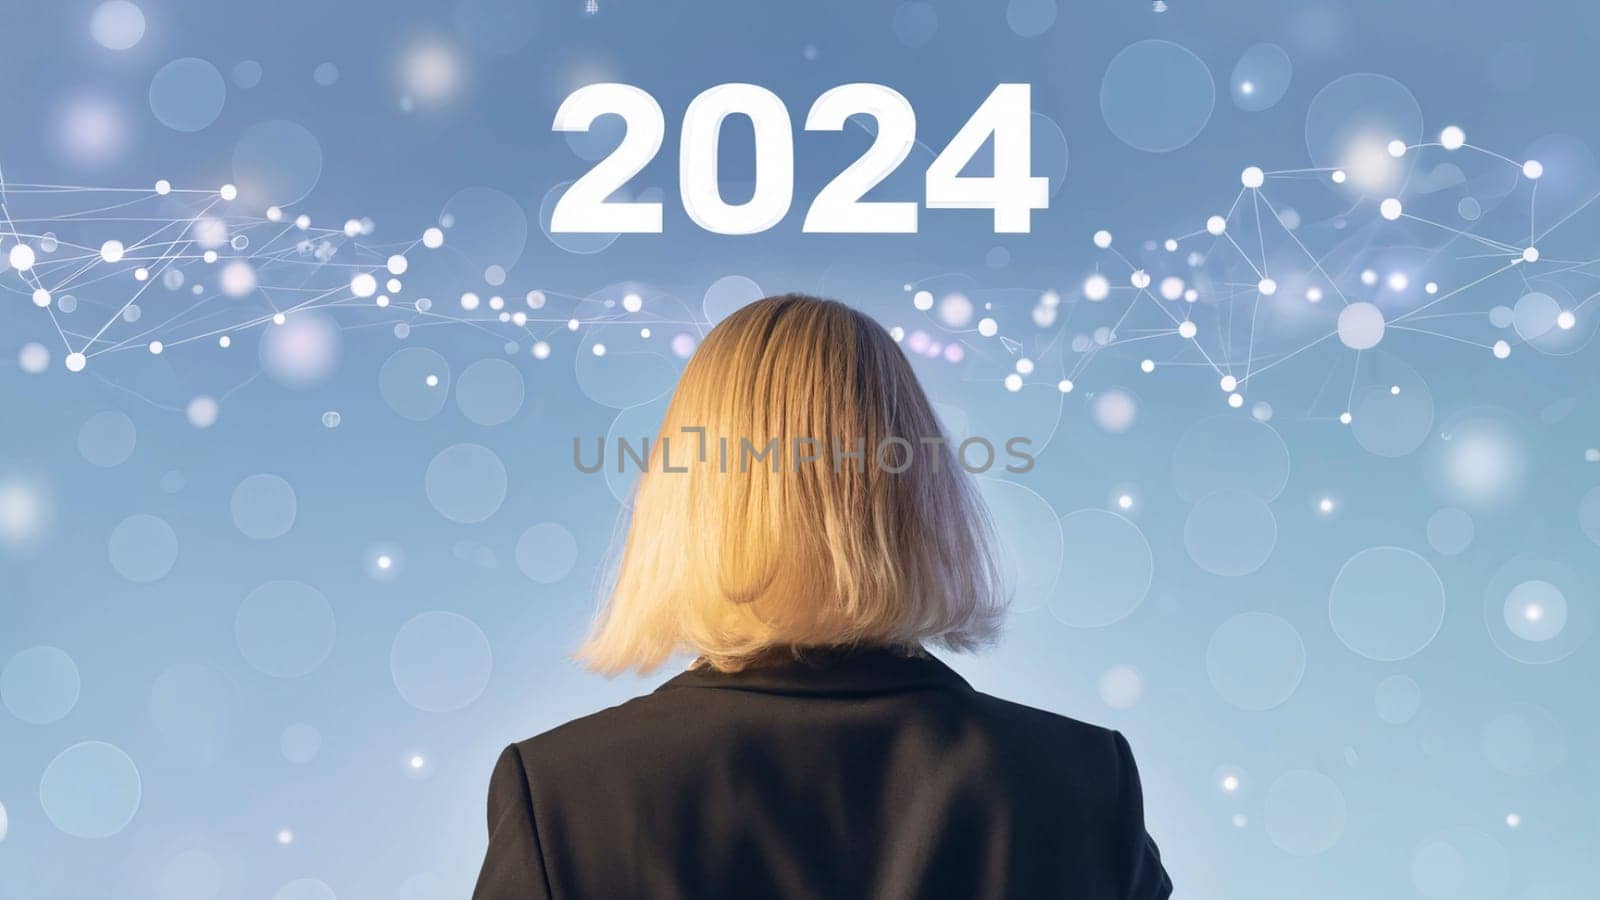 business woman with the new year 2024 for her eyes. Businesswoman look at 2024 white color letter over future network background, Business happy new year 2024 cover concept. High quality image